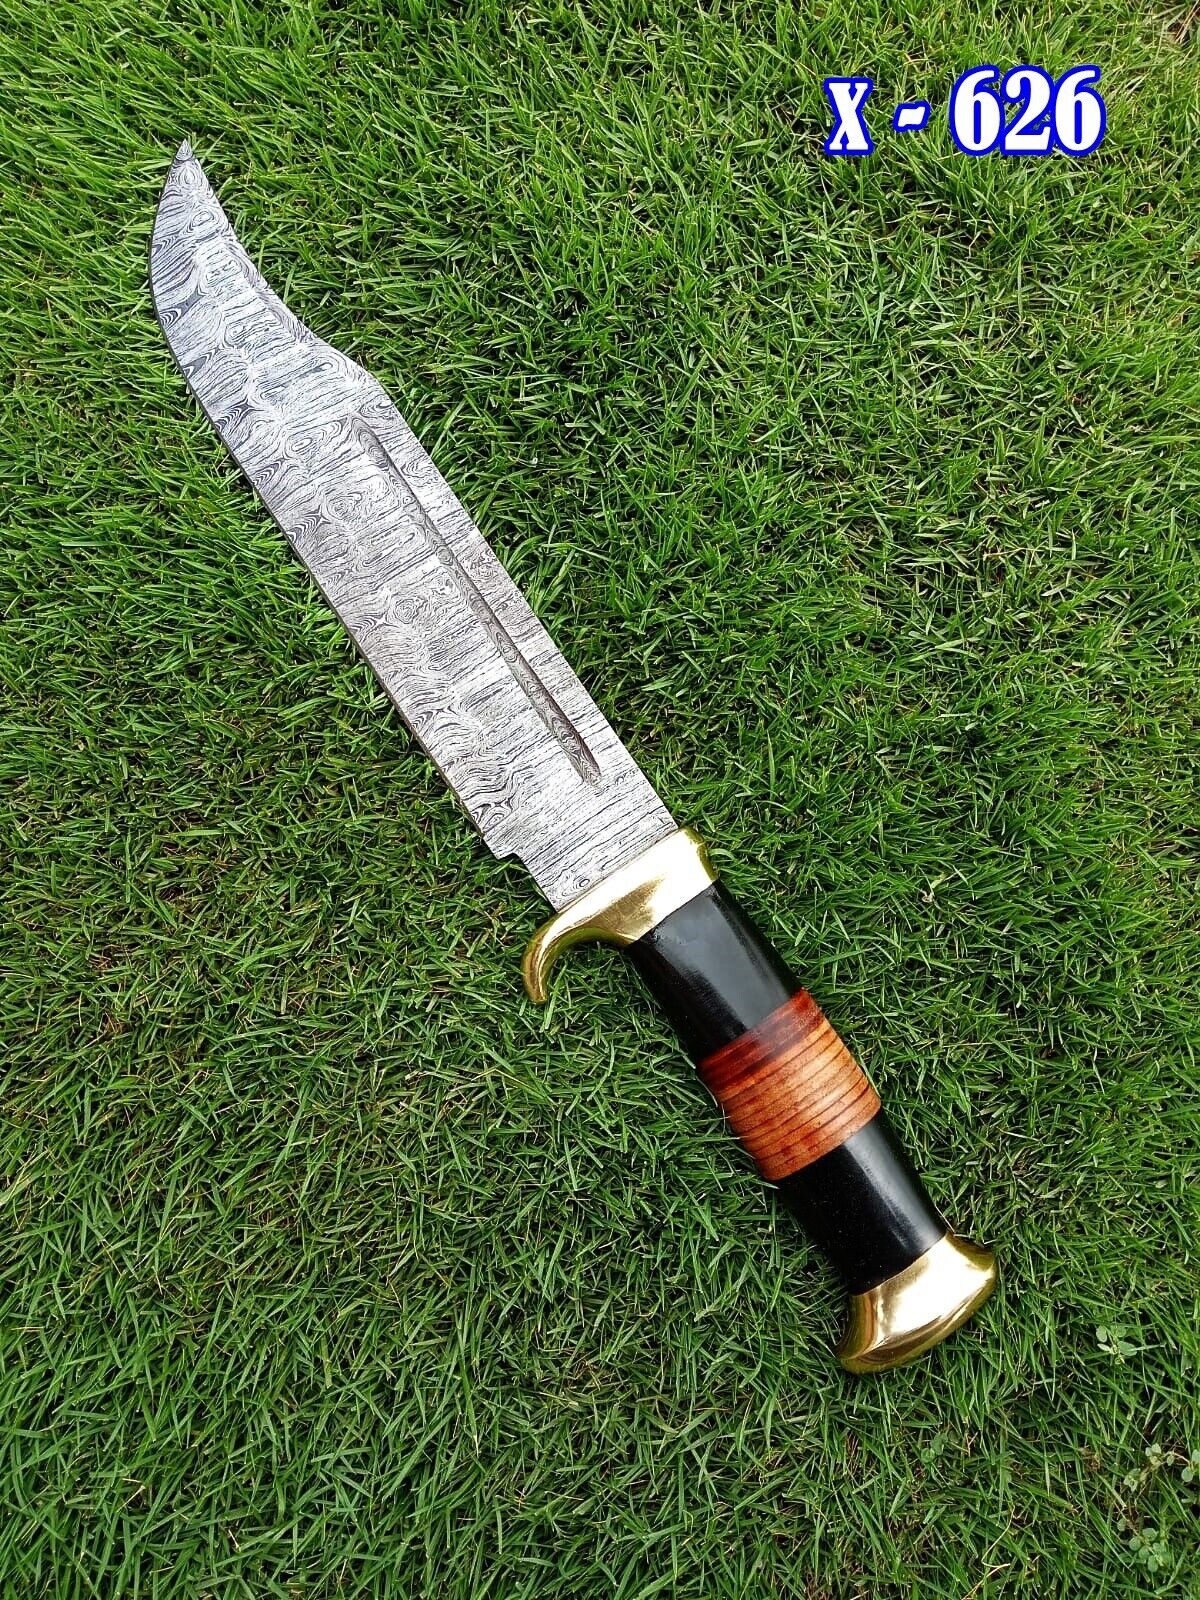 16” Handmade Damascus Steel hunting Bowie fixed blade knife survival knife